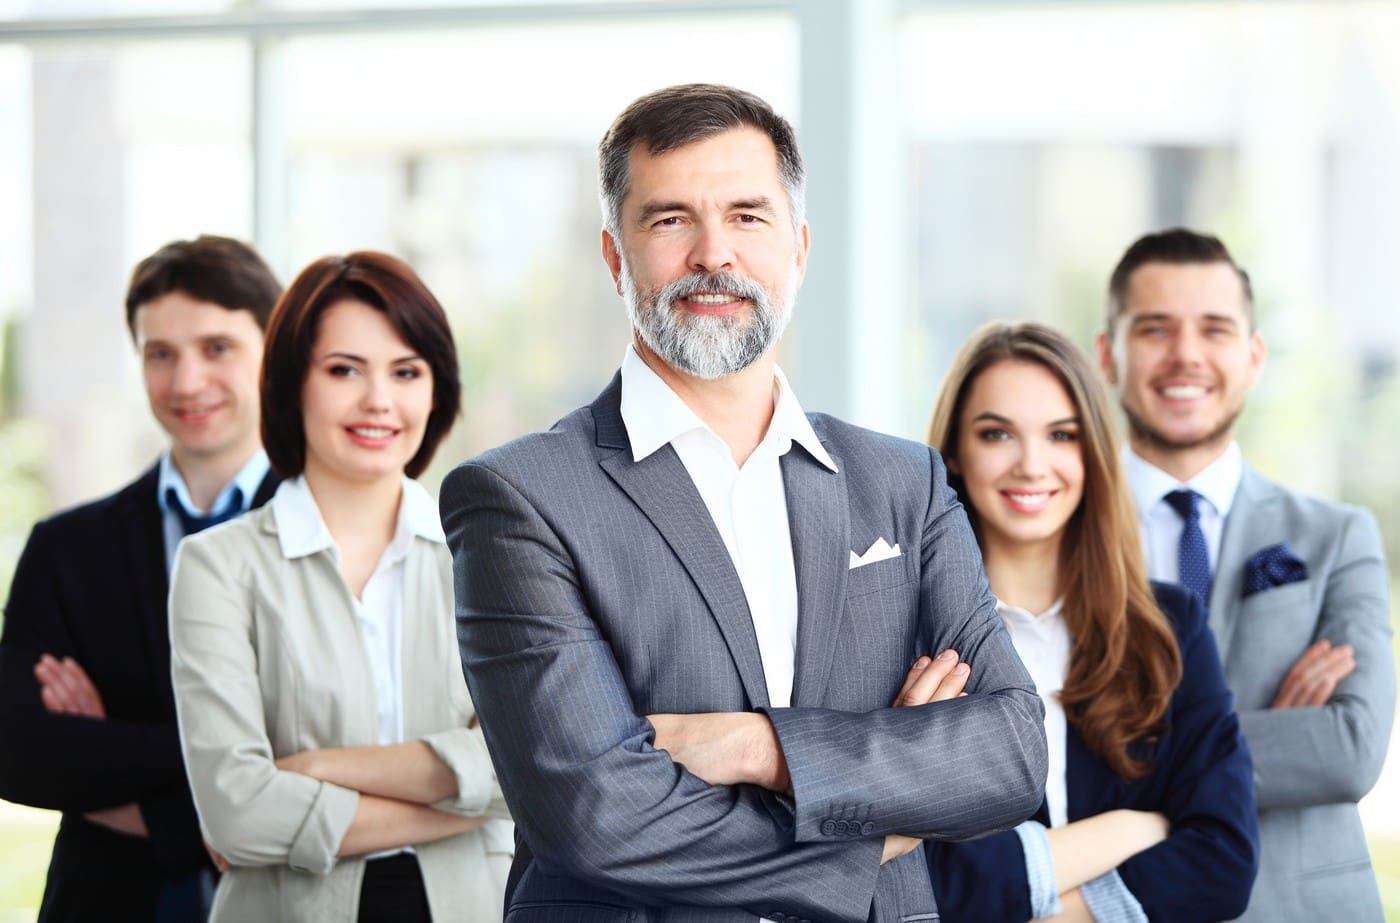 New – Business Professionals Smiling – Senior Exec in front | BlueSky Solutions Group LLC